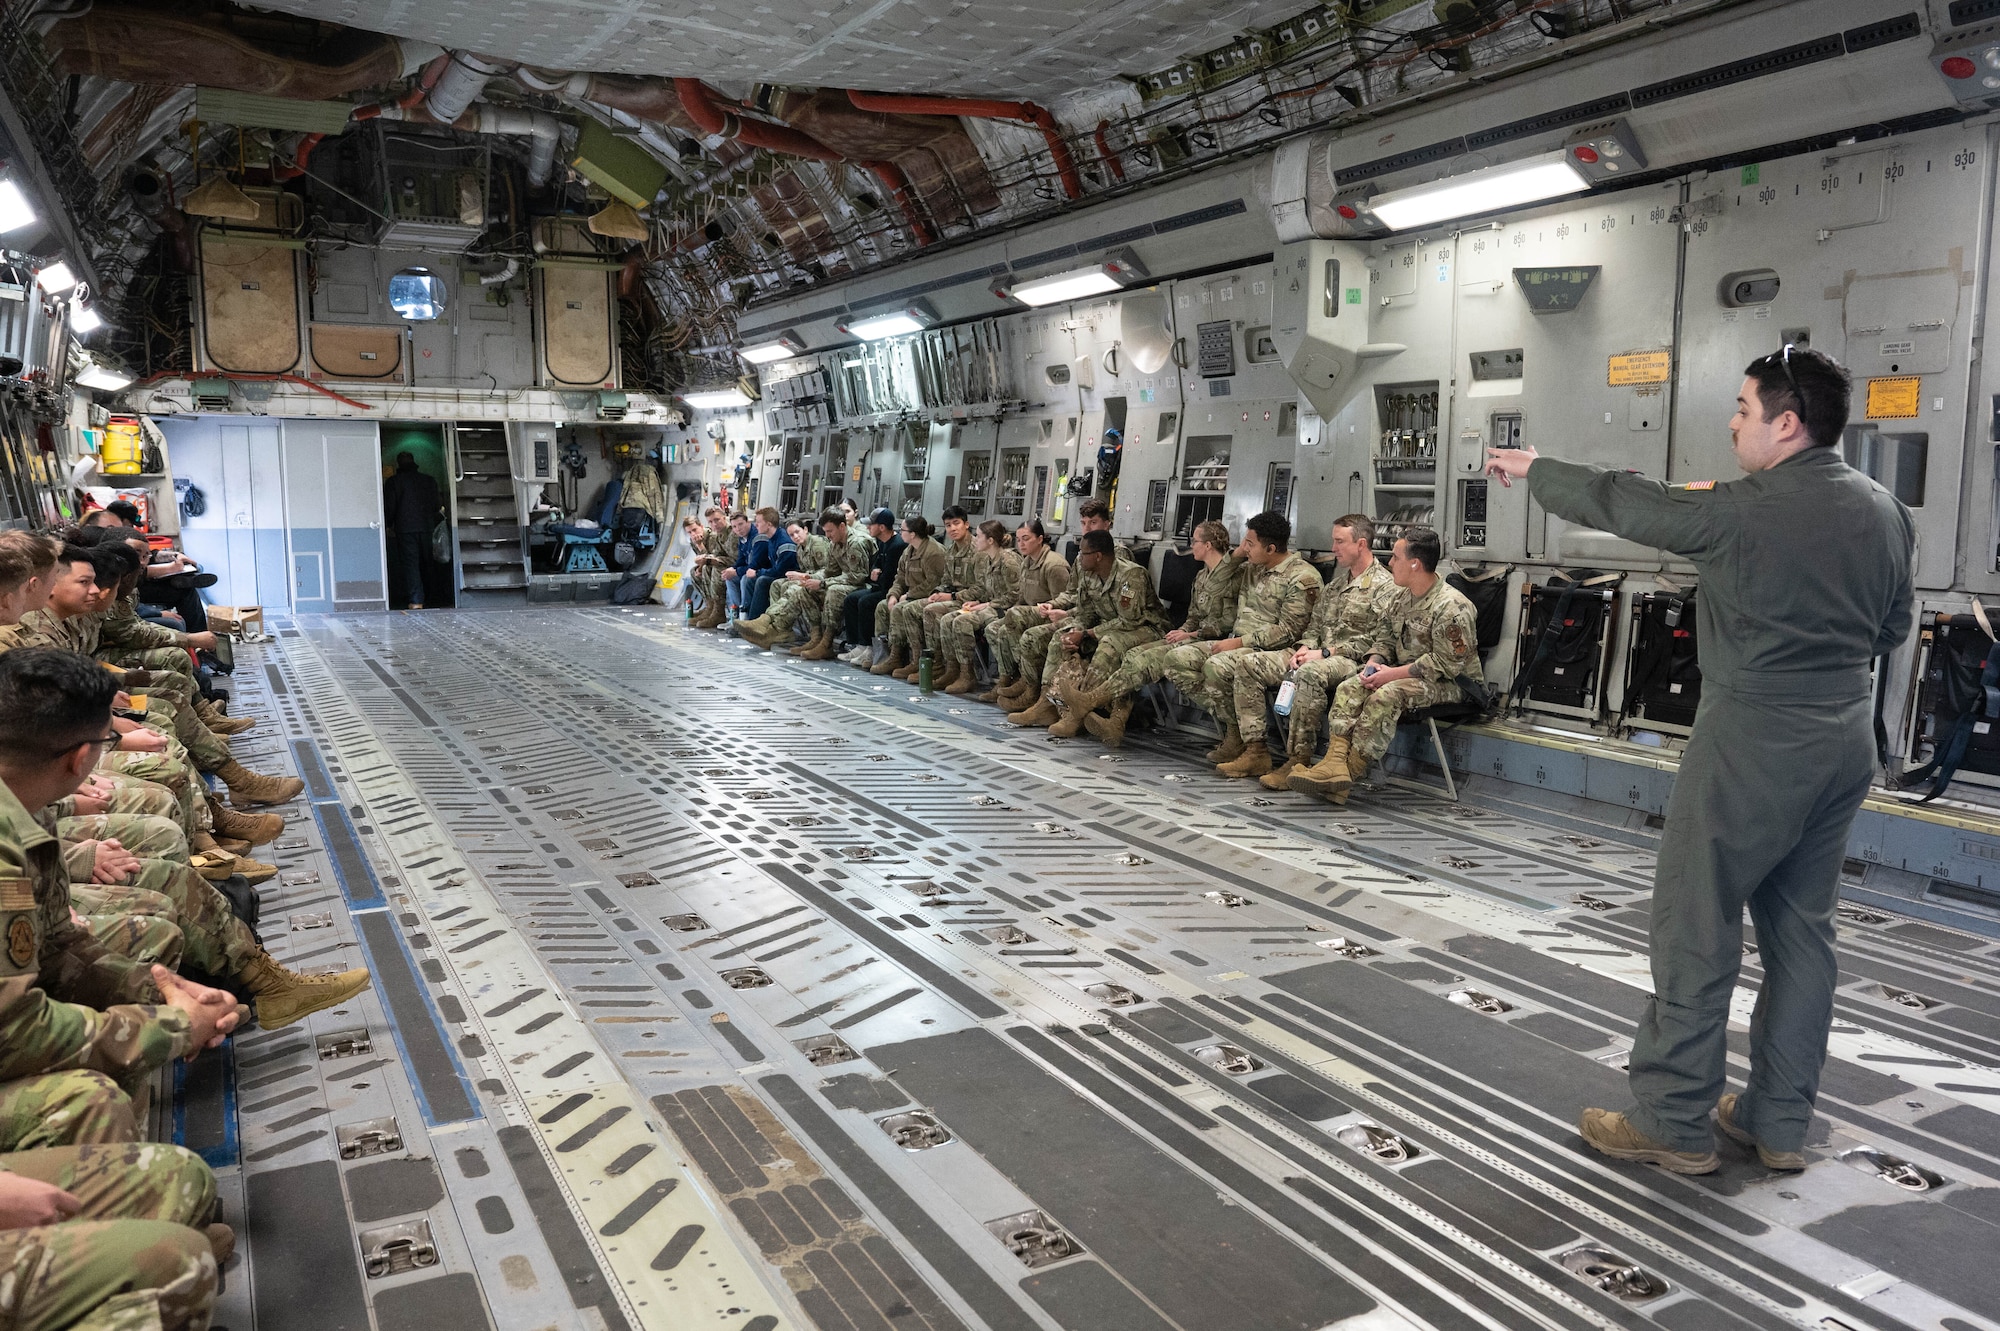 U.S. Air Force Staff Sgt. Jacob Villaruel, 58th Airlift Squadron loadmaster instructor, gives a safety brief to Air Force ROTC cadets and first term Airmen on a C-17 Globemaster III orientation flight at Altus Air Force Base, Oklahoma, March 15, 2024. The cadets and Airmen were exposed to the capabilities of the aircraft and daily operations of aircrew. (U.S. Air Force photo by Airman 1st Class Heidi Bucins)